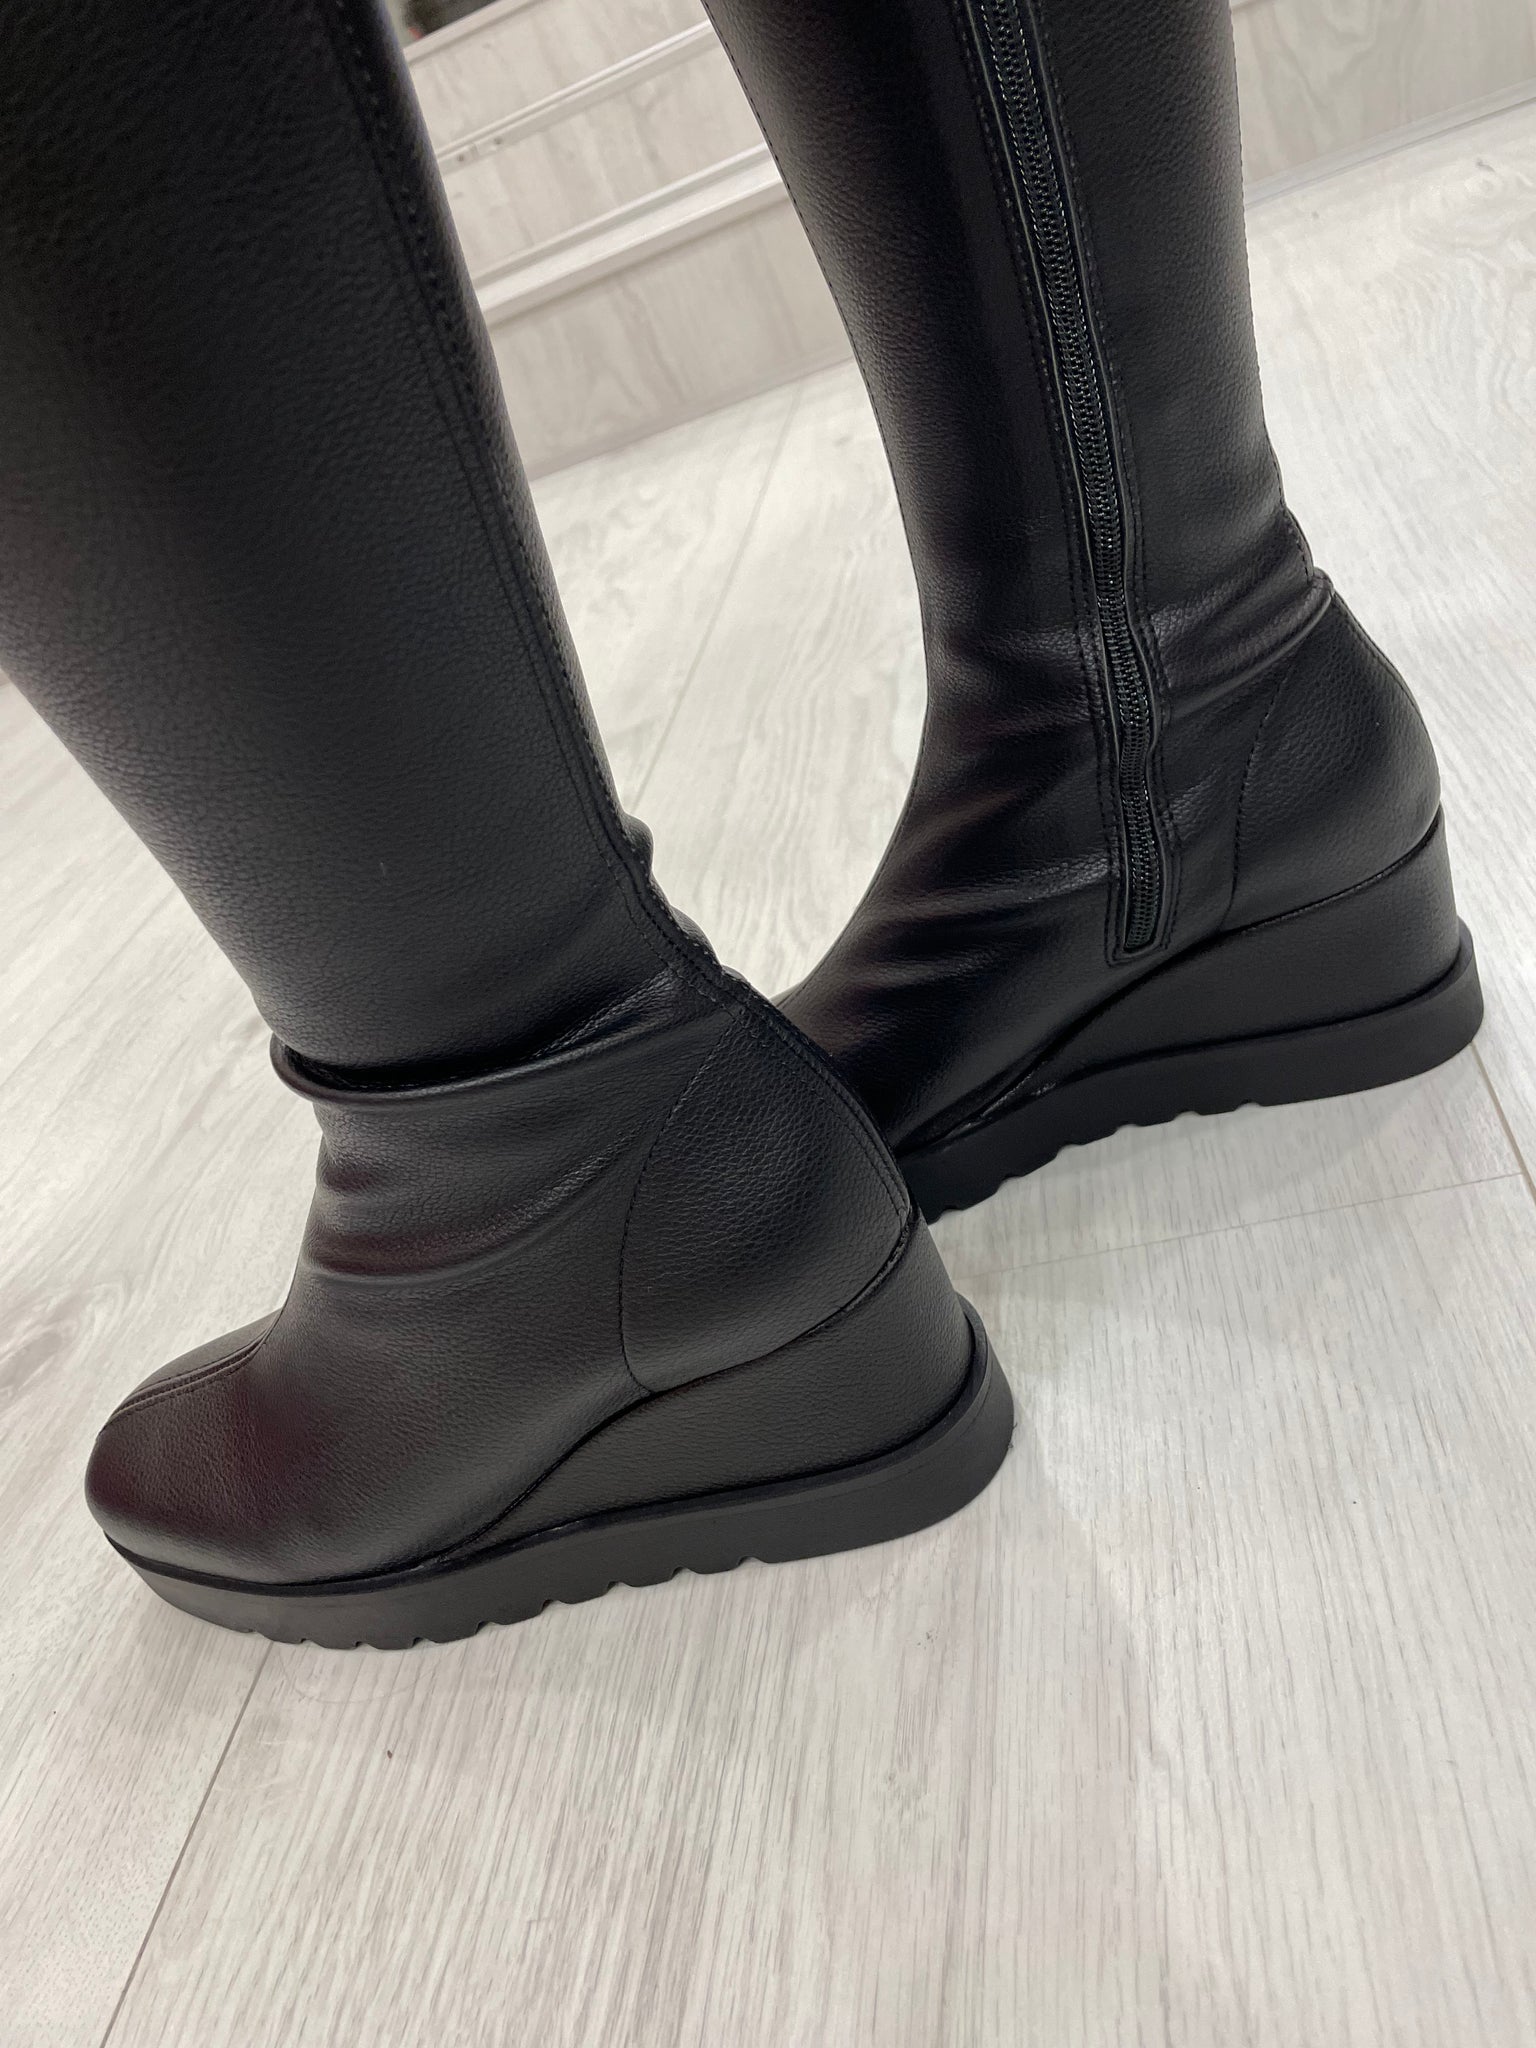 Viguera Leather Look Knee High Boots